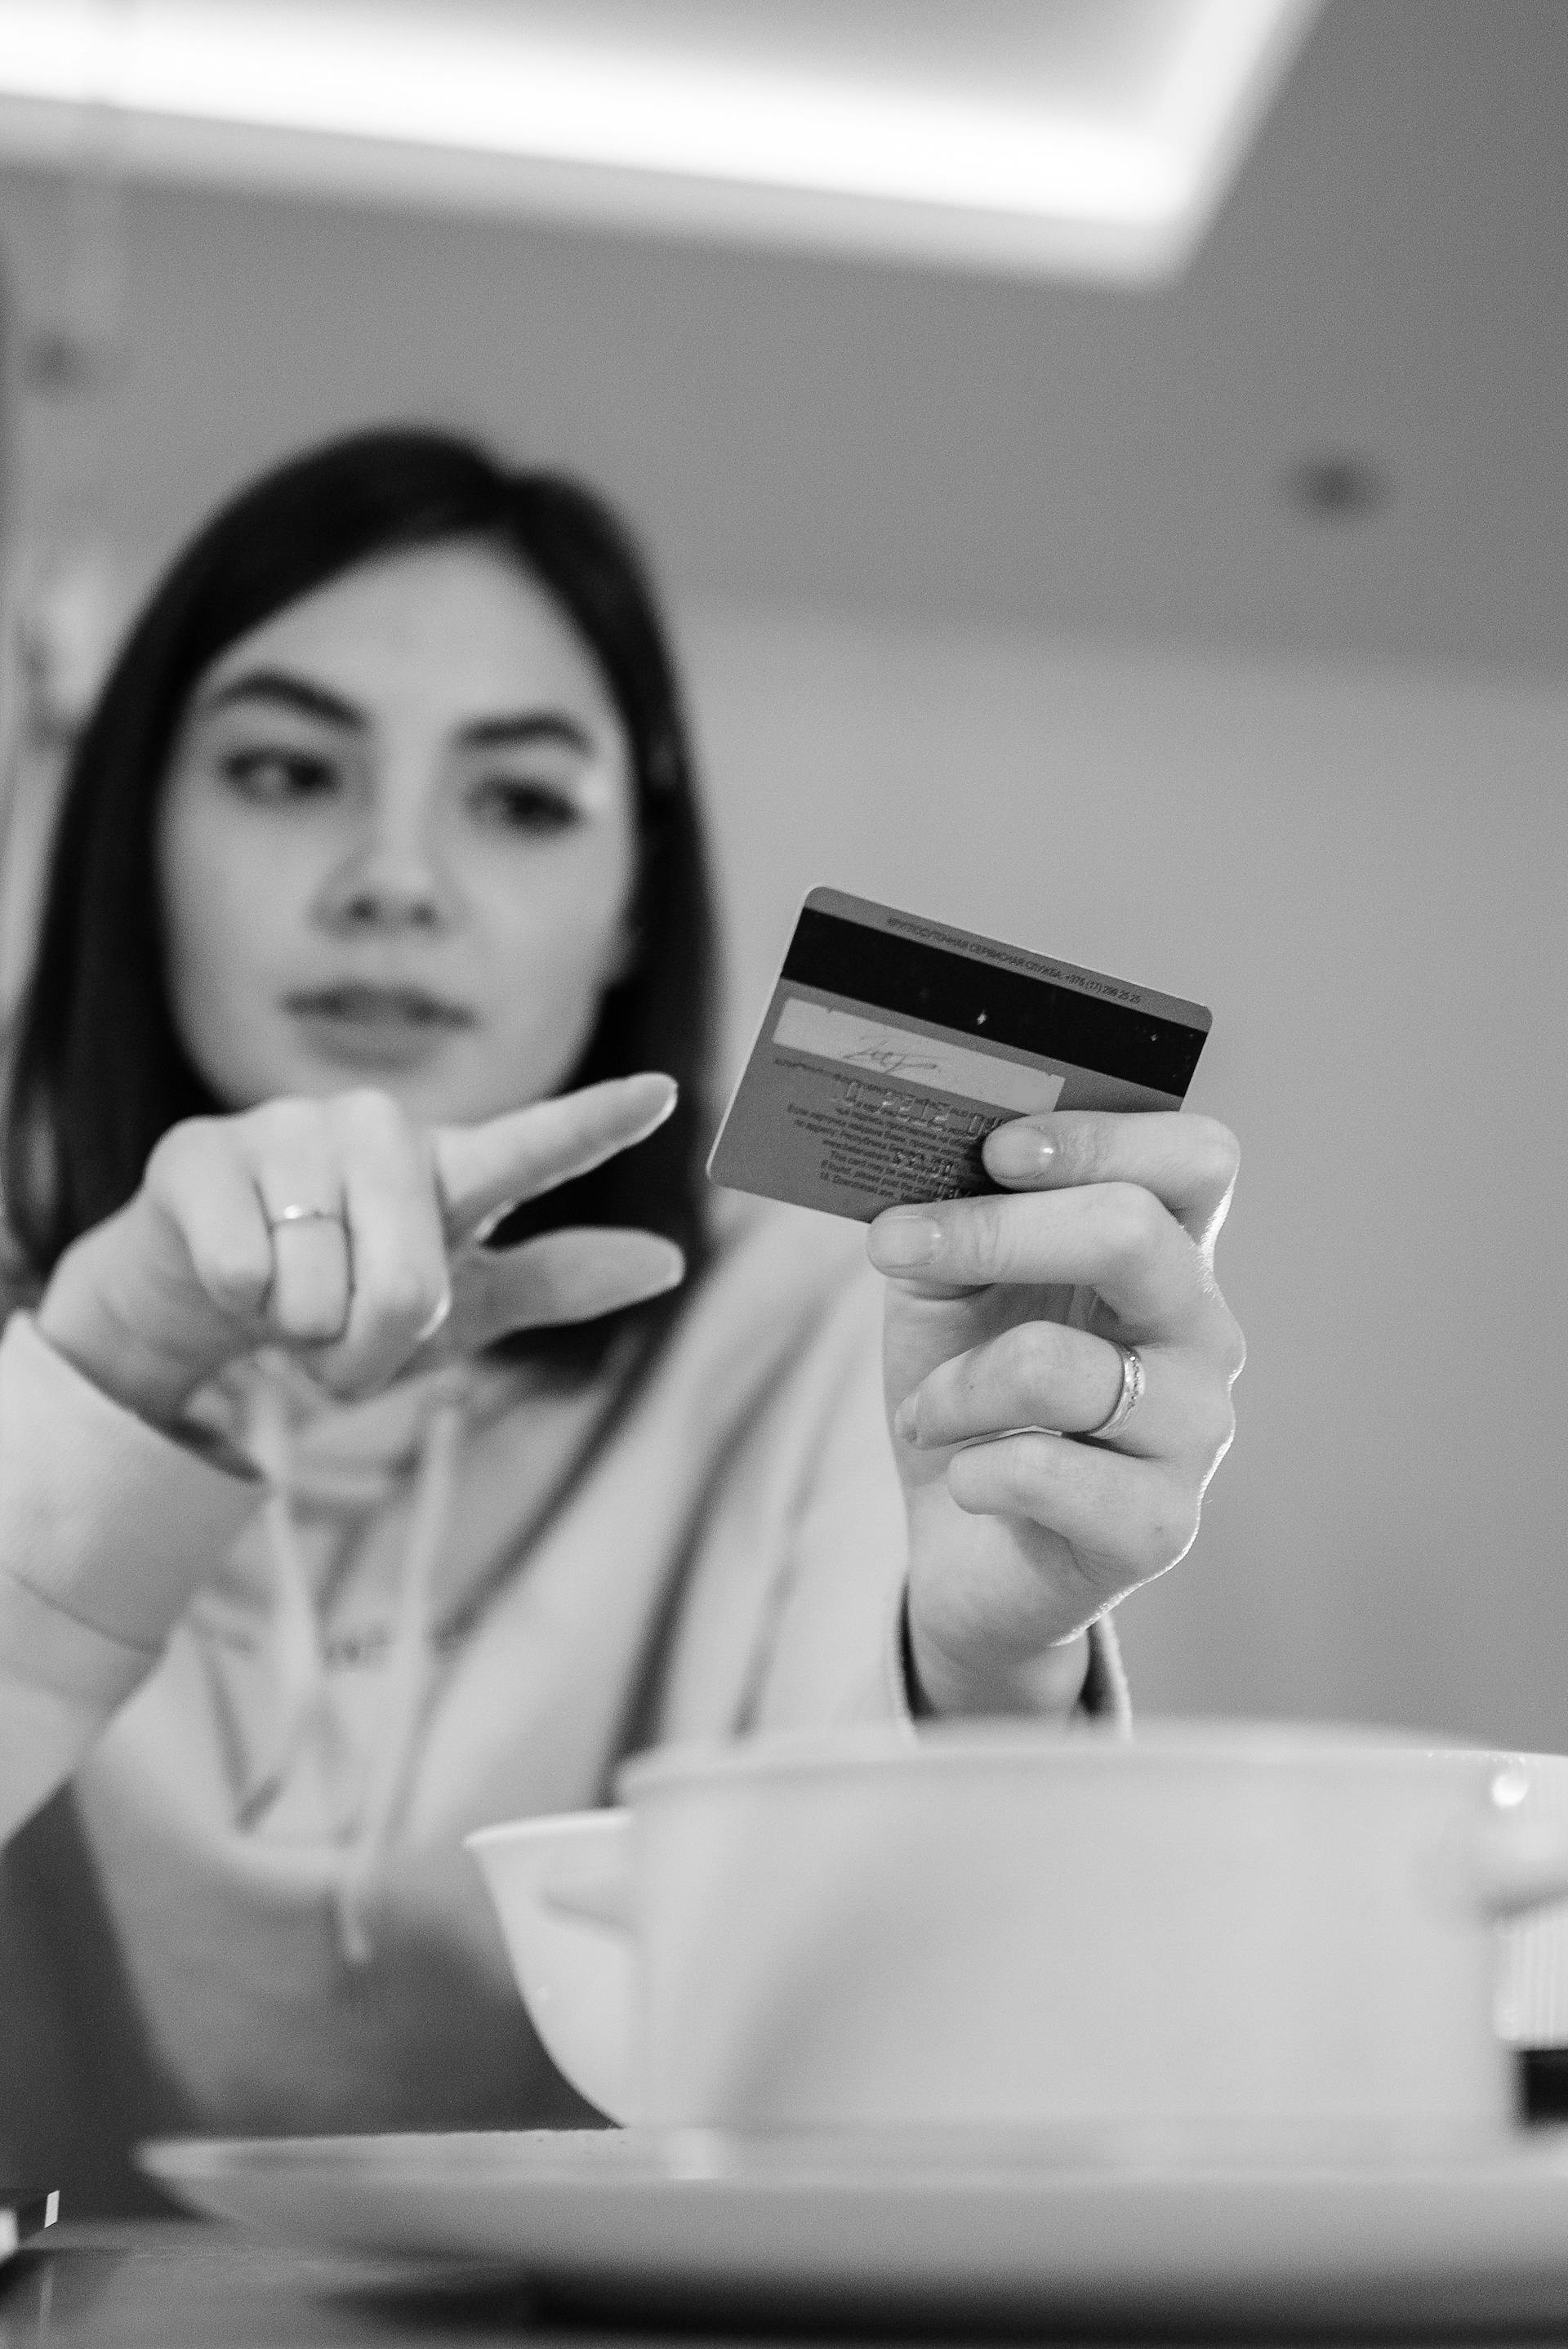 A woman holding a credit card | Source: Pexels